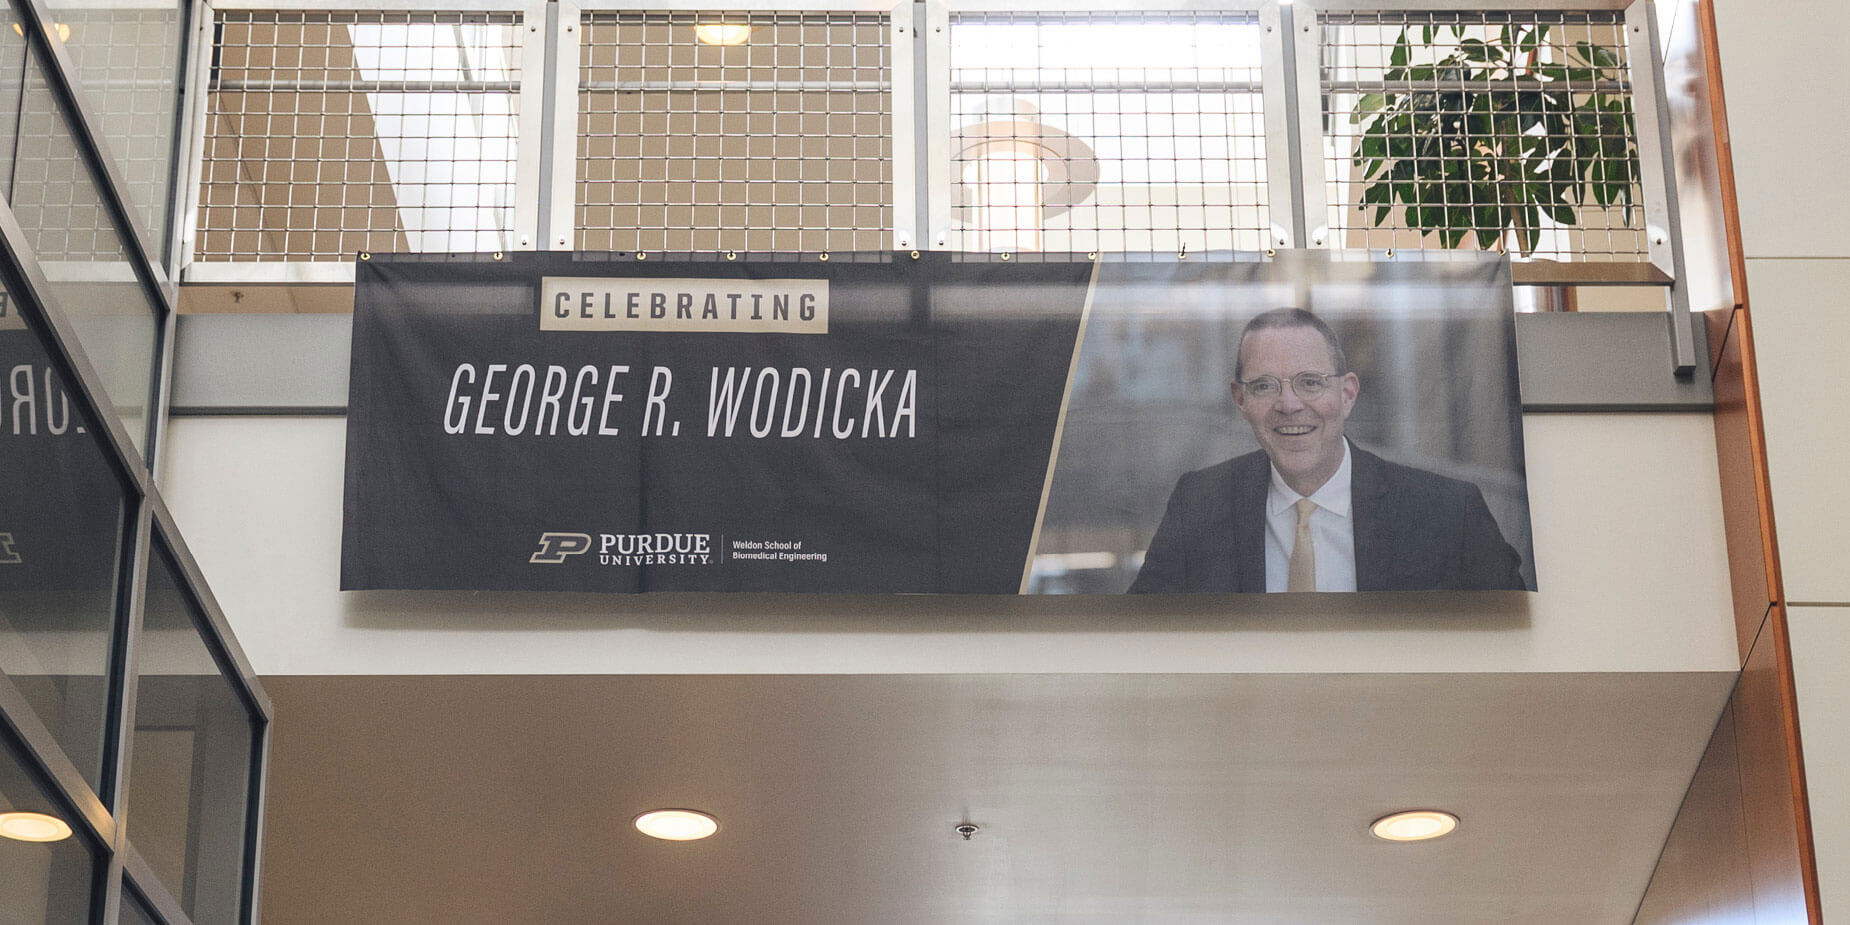 A banner at the Sept. 9 event celebrates George Wodicka’s contributions to Purdue biomedical engineering.